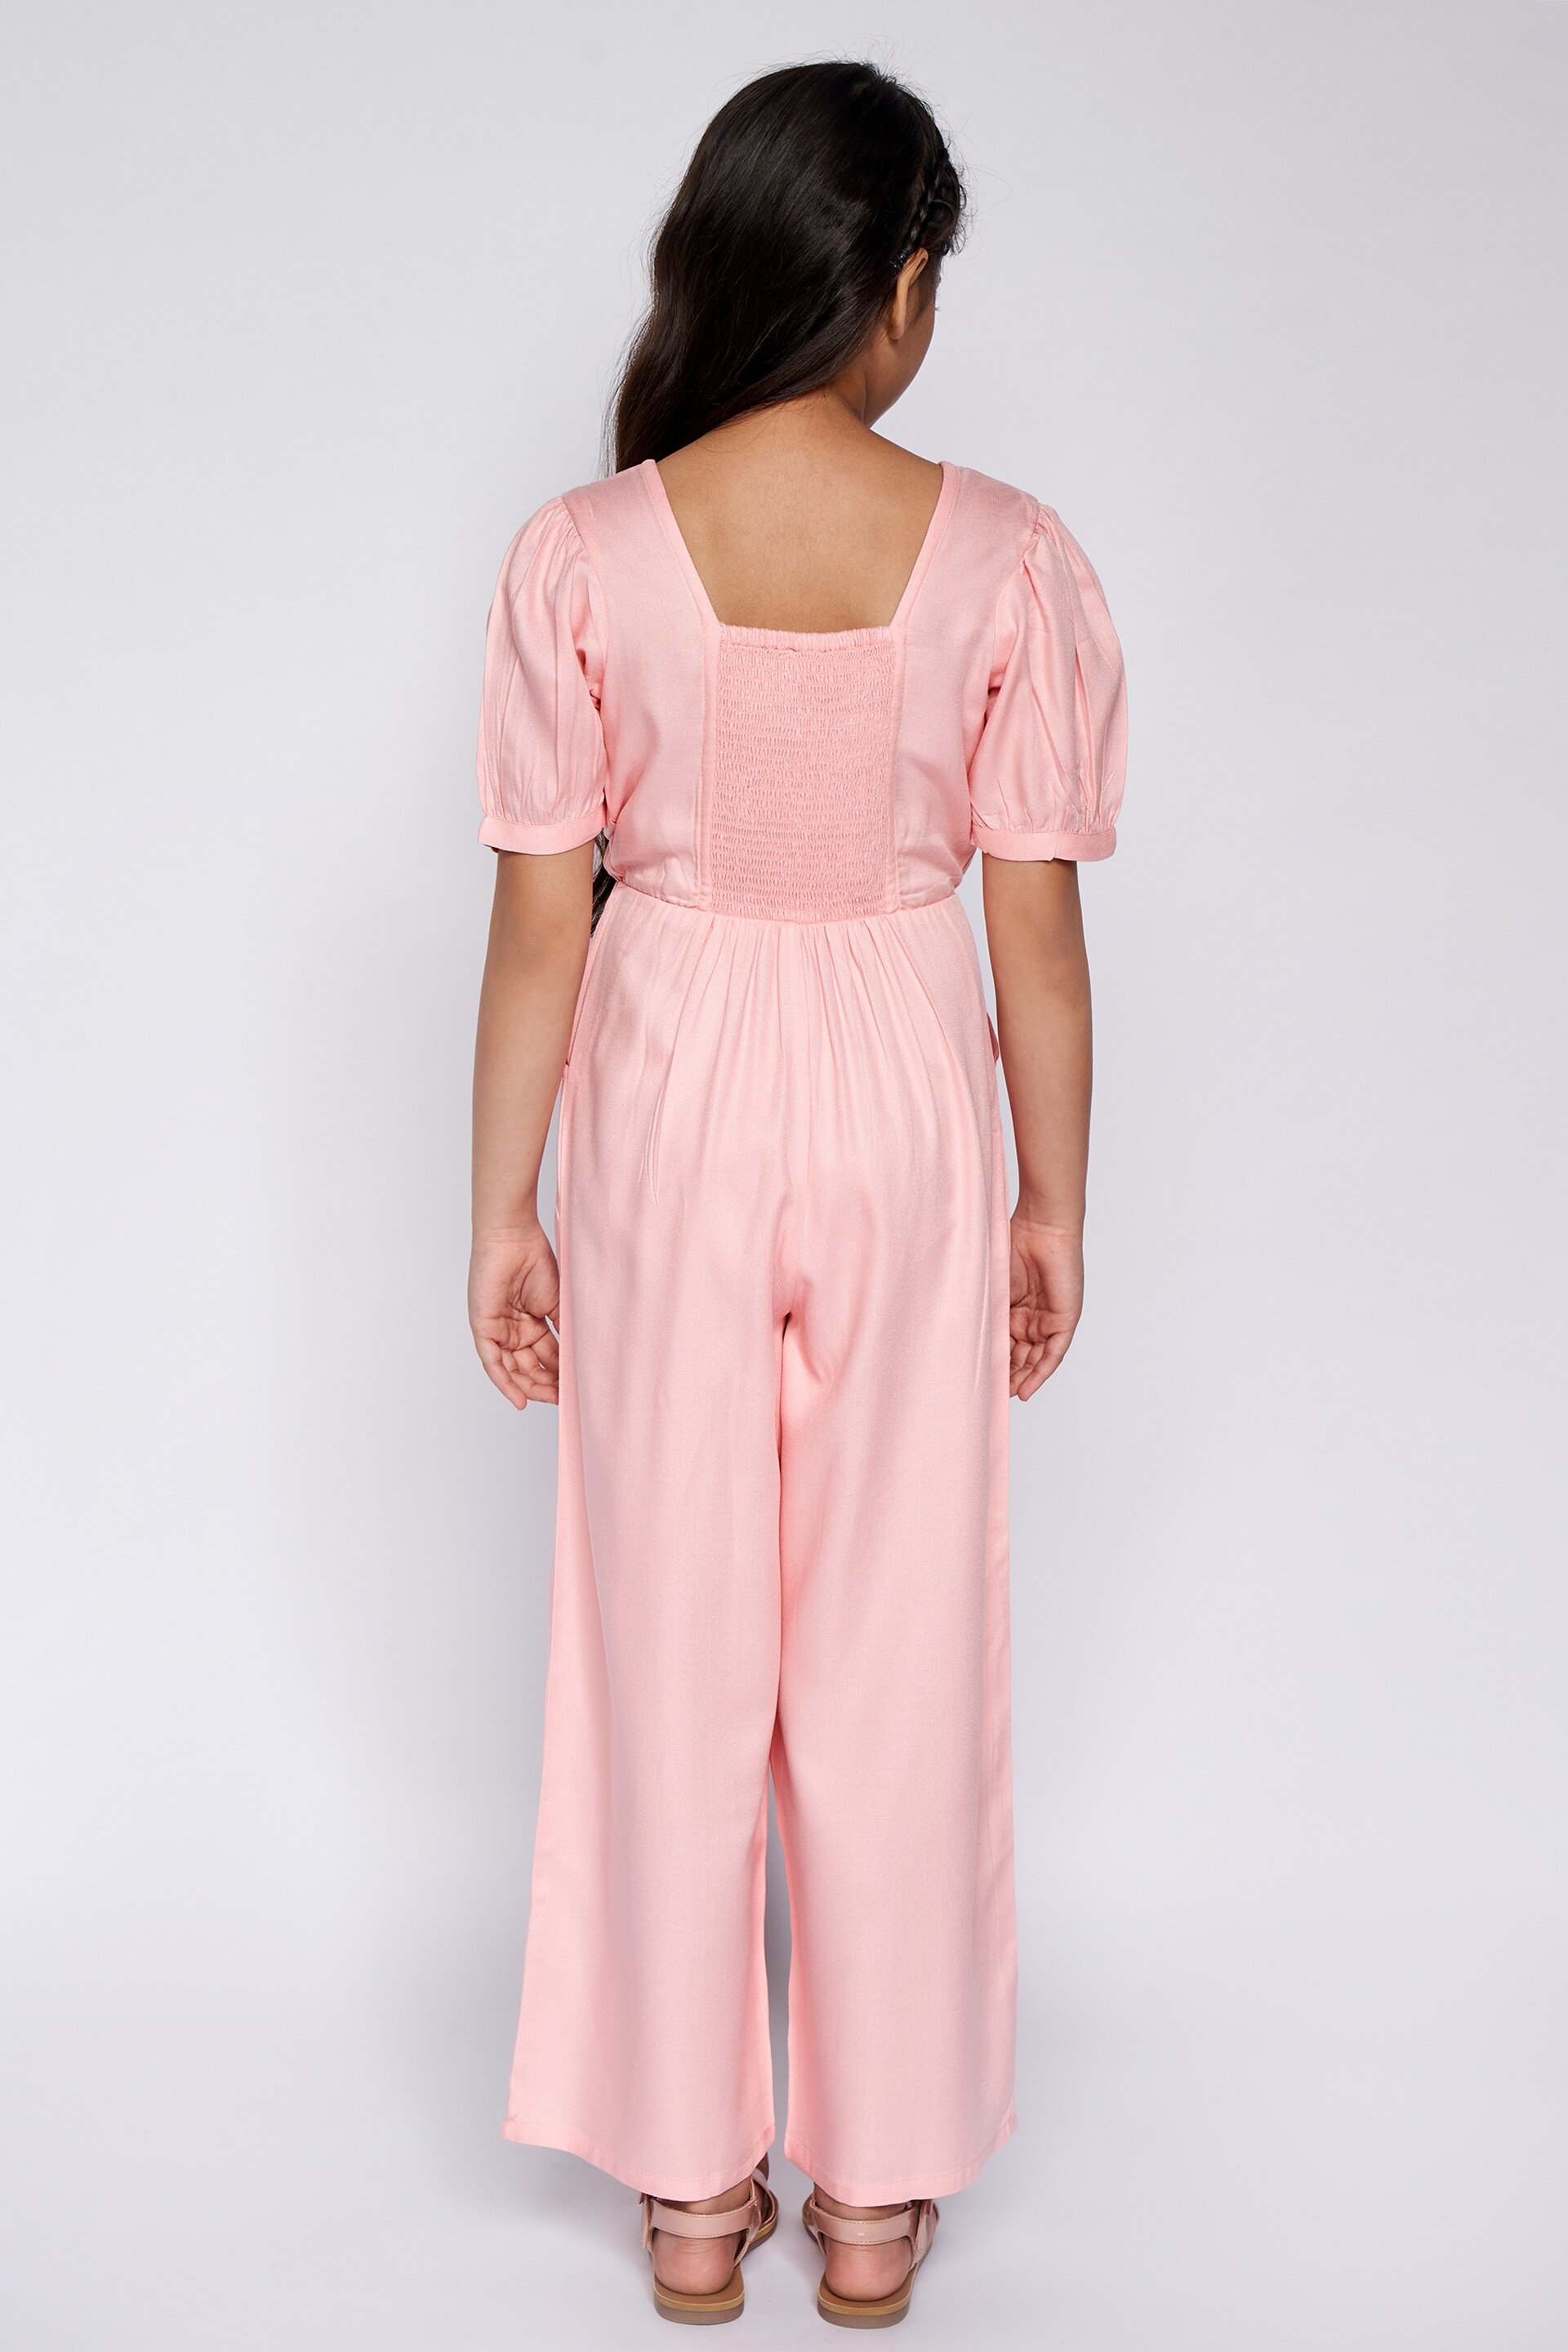 AND | AND Pink Jump Suit 4